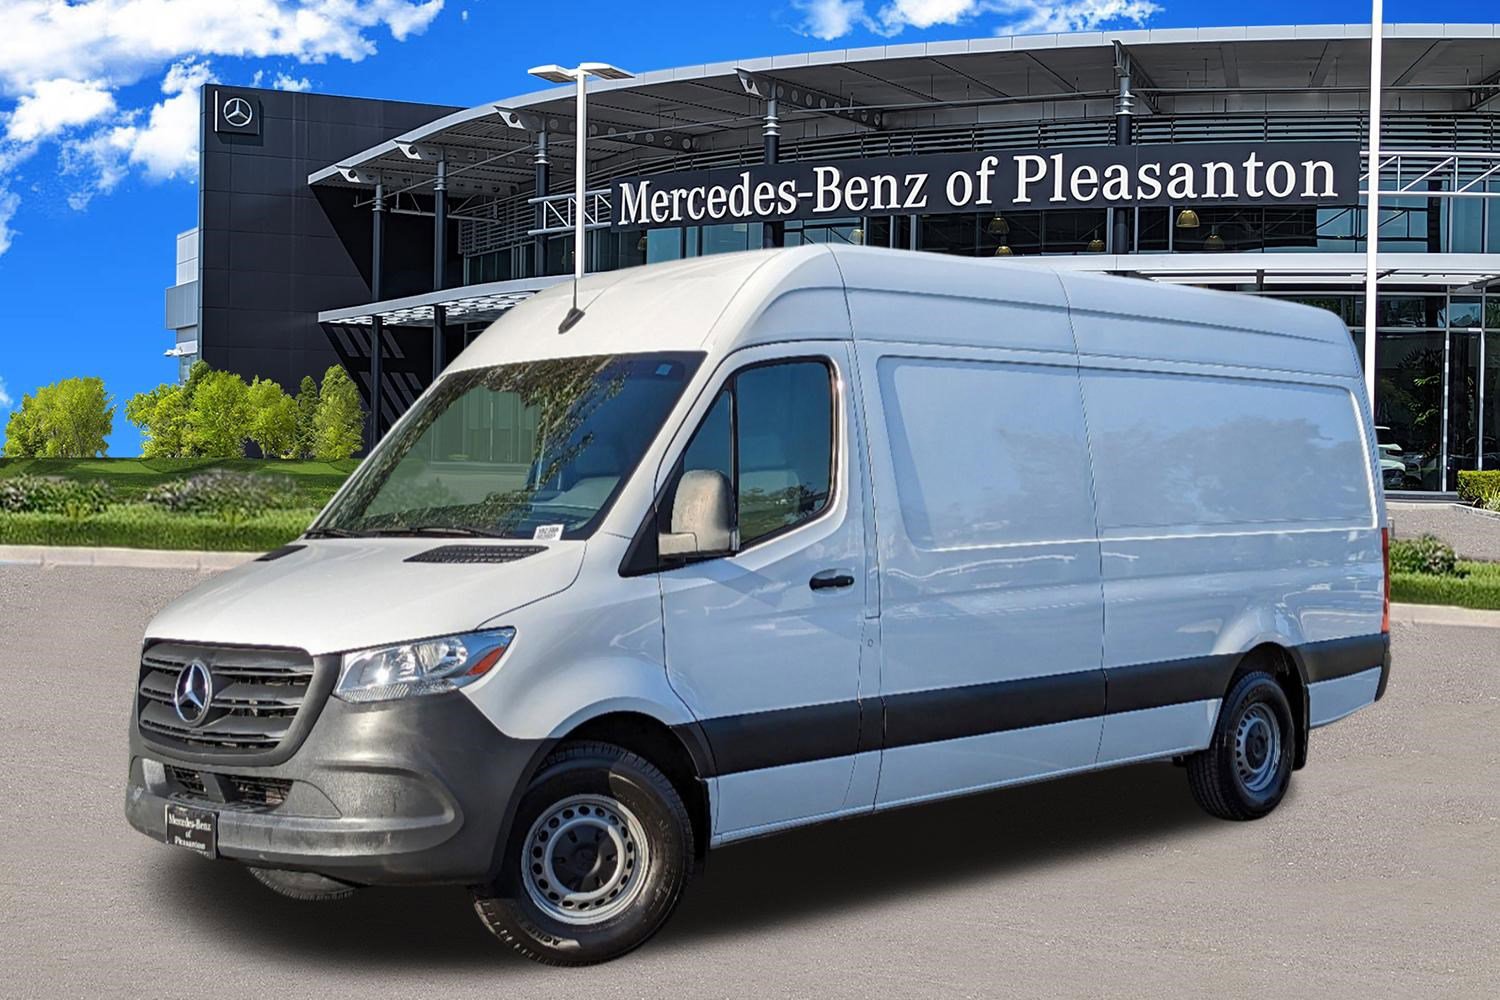 Used Mercedes-Benz Sprinter Van for Sale Near Me in Fairfield, CA -  Autotrader